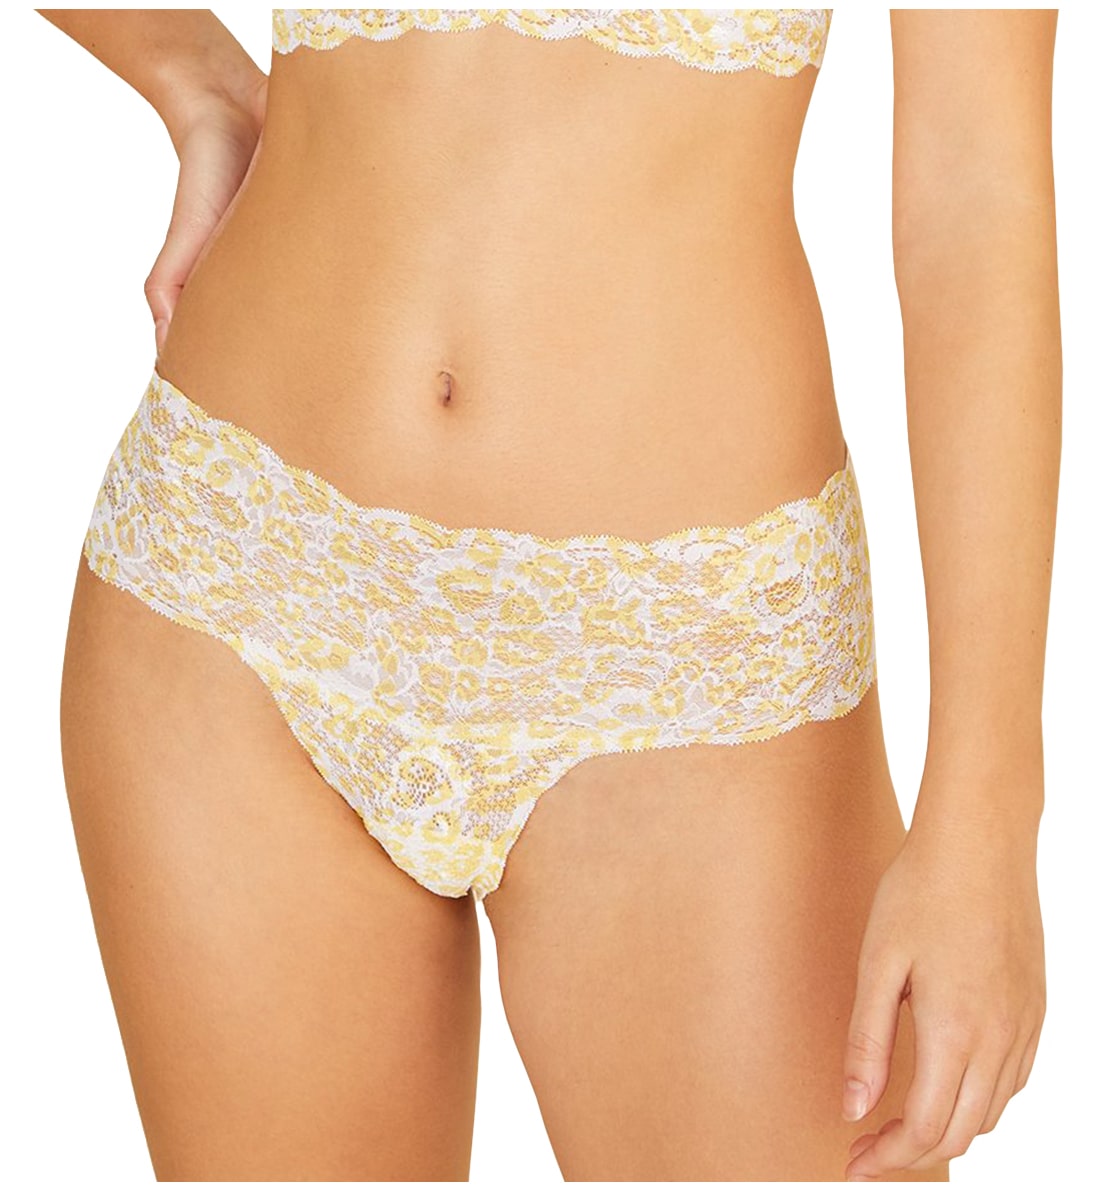 Cosabella Never Say Never Printed Comfie Thong (NEVEP0343),S/M,Animal Limone - Animal Limone,S/M